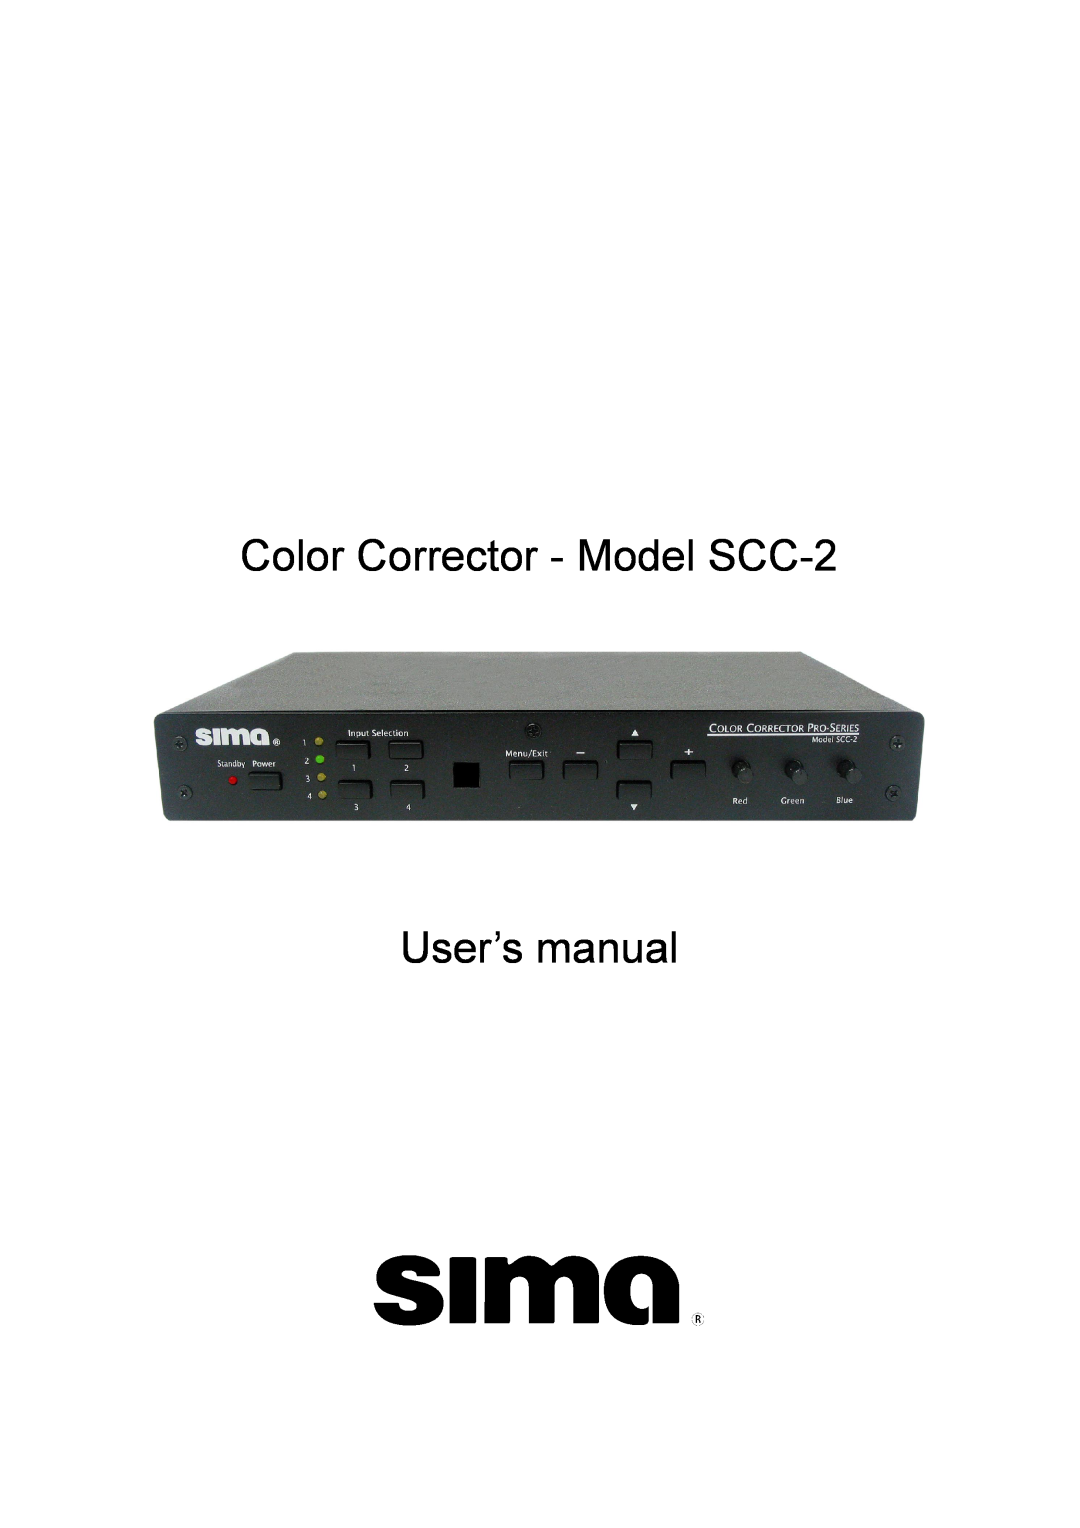 Sima Products user manual Color Corrector - Model SCC-2 